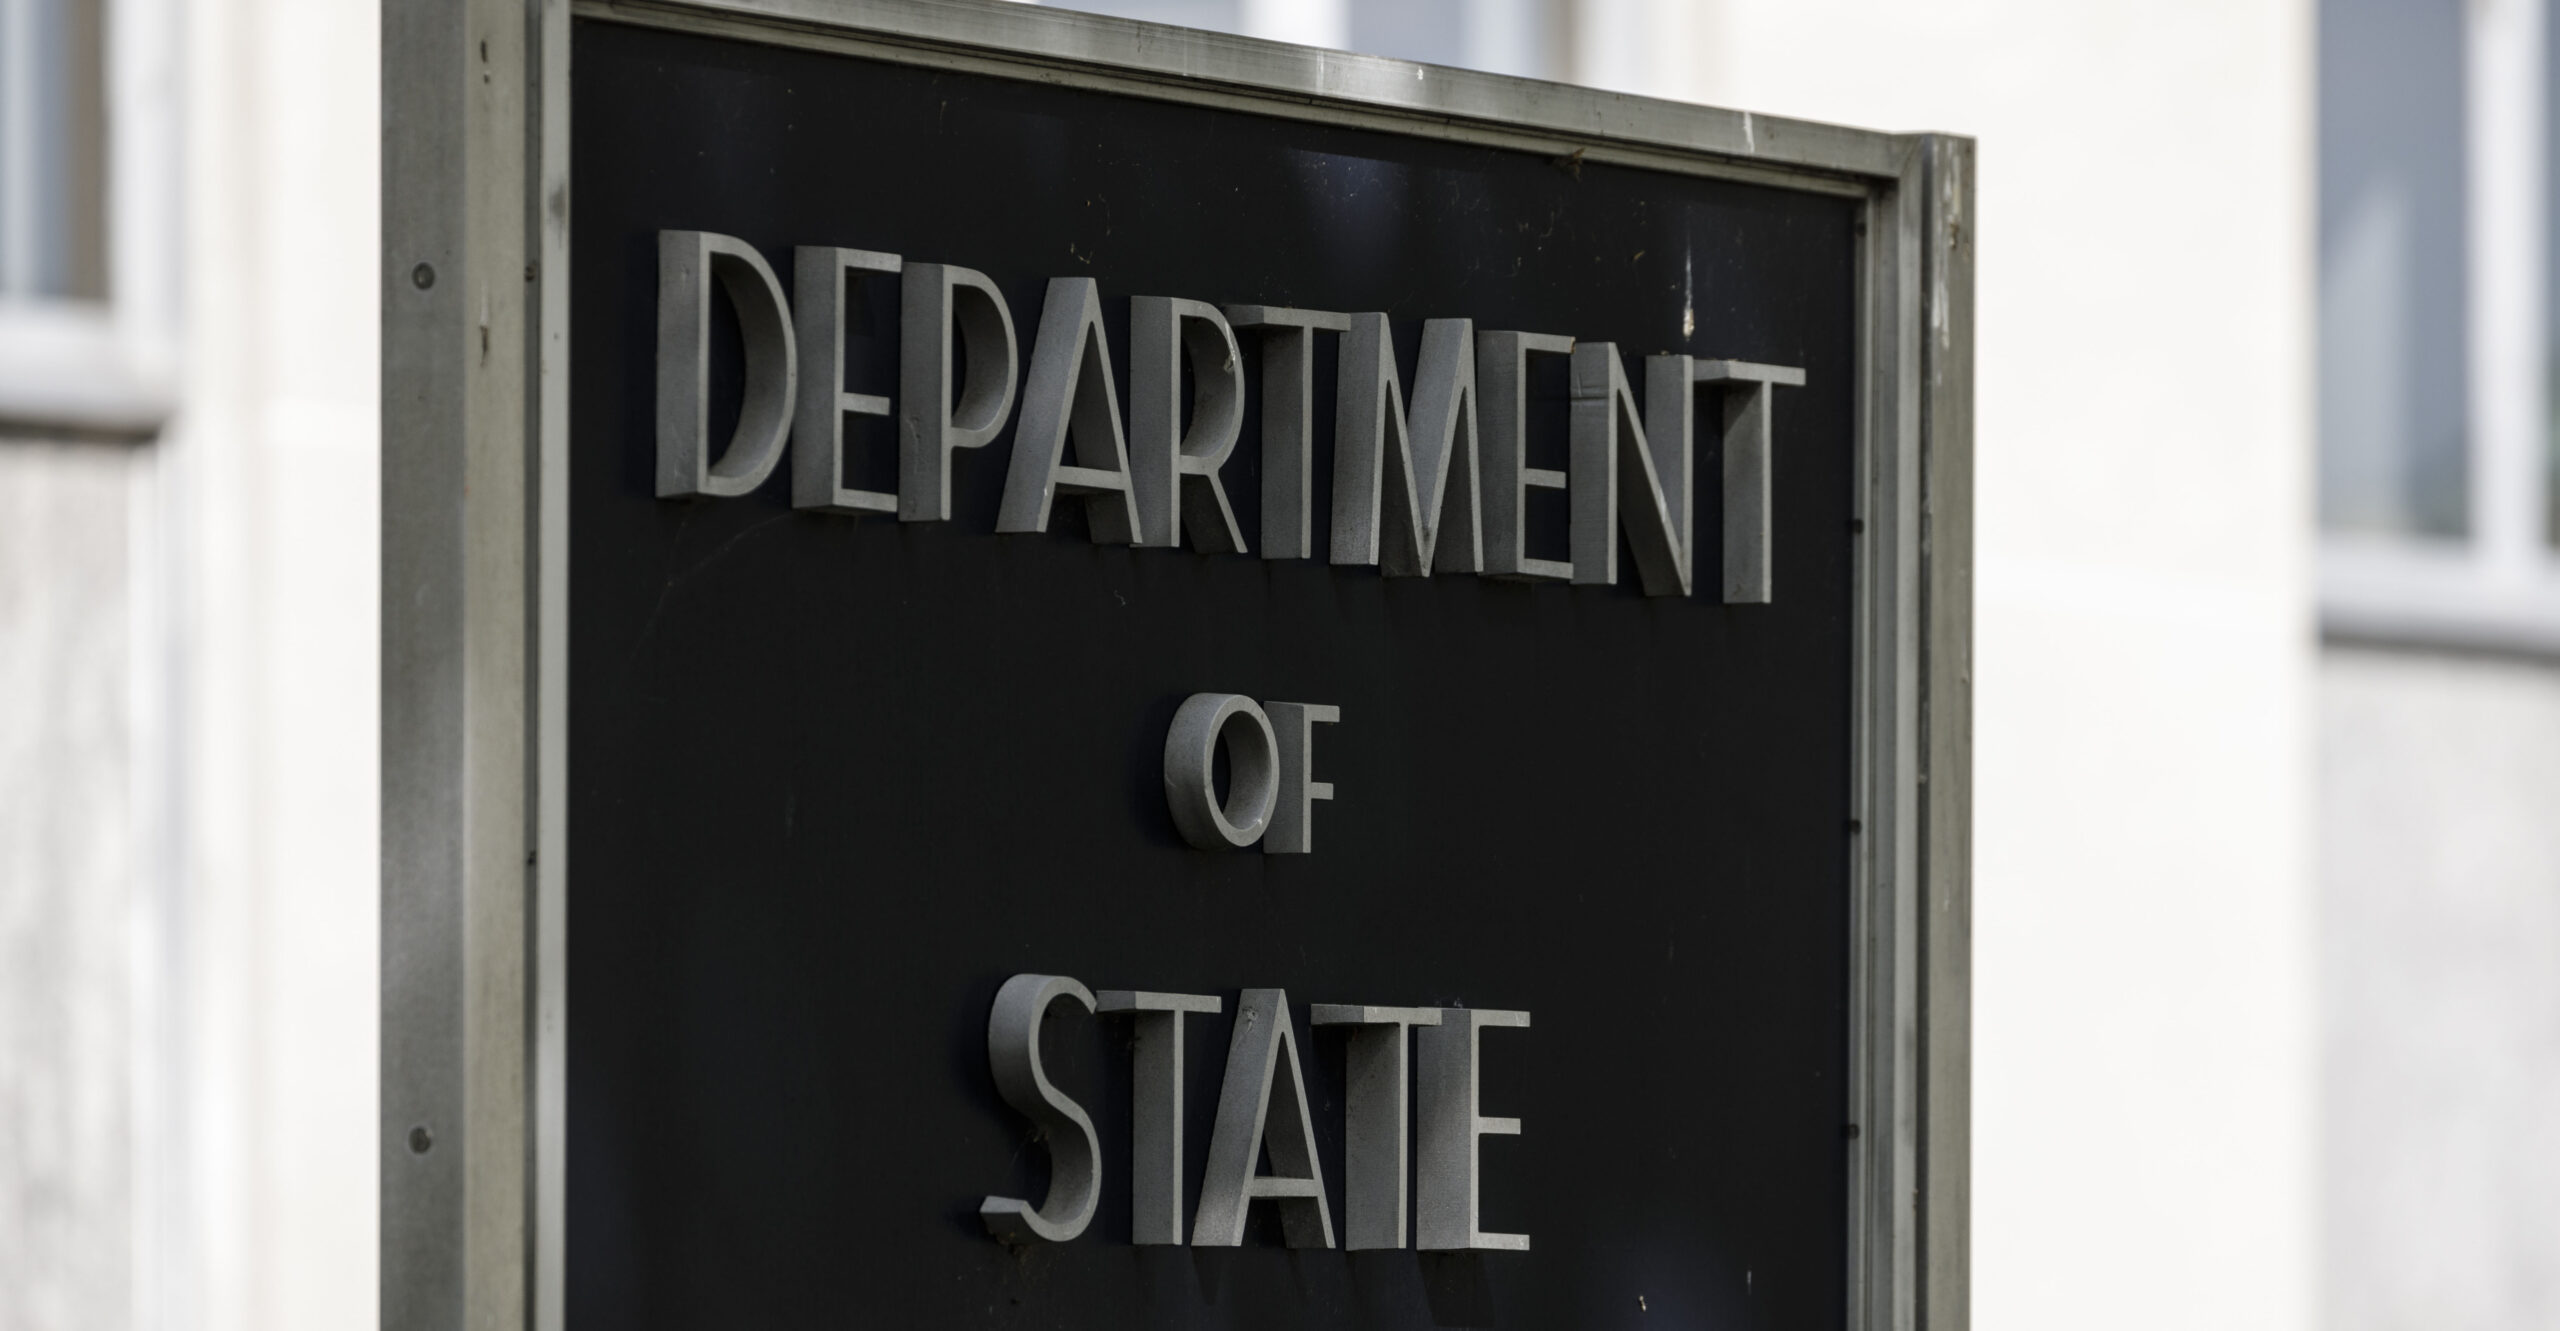 State Department Partners With Left-Leaning Media in Propaganda Push, Documents Reveal